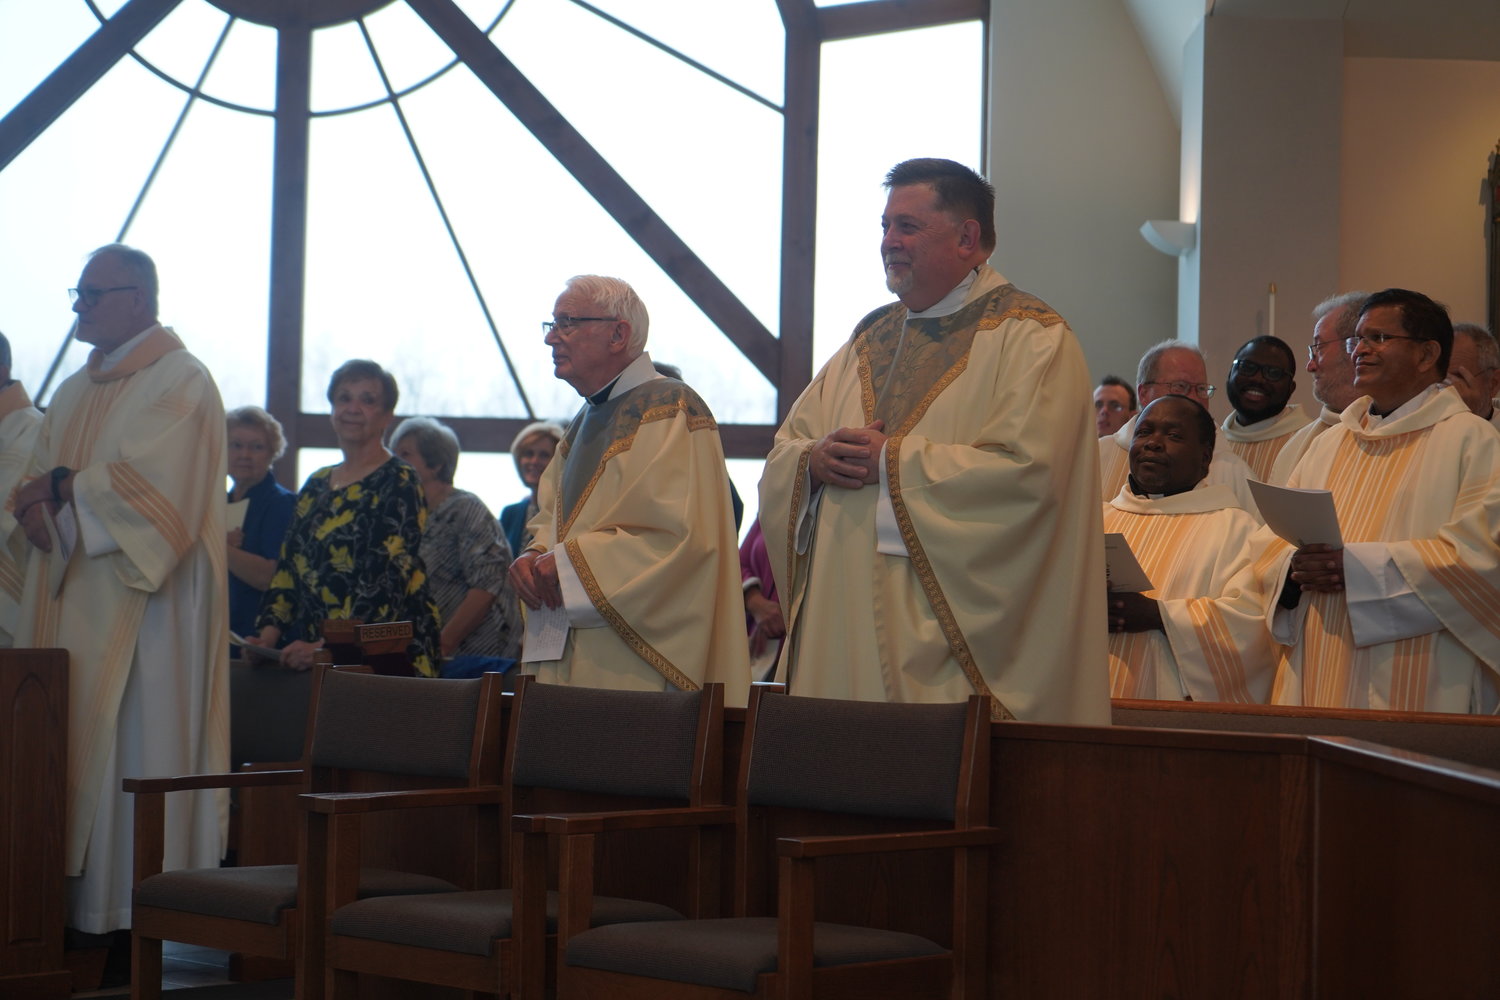 Father Frederick Elskamp and Father William Peckman are among the priests of the diocese who are having significant priestly anniversaries this year.